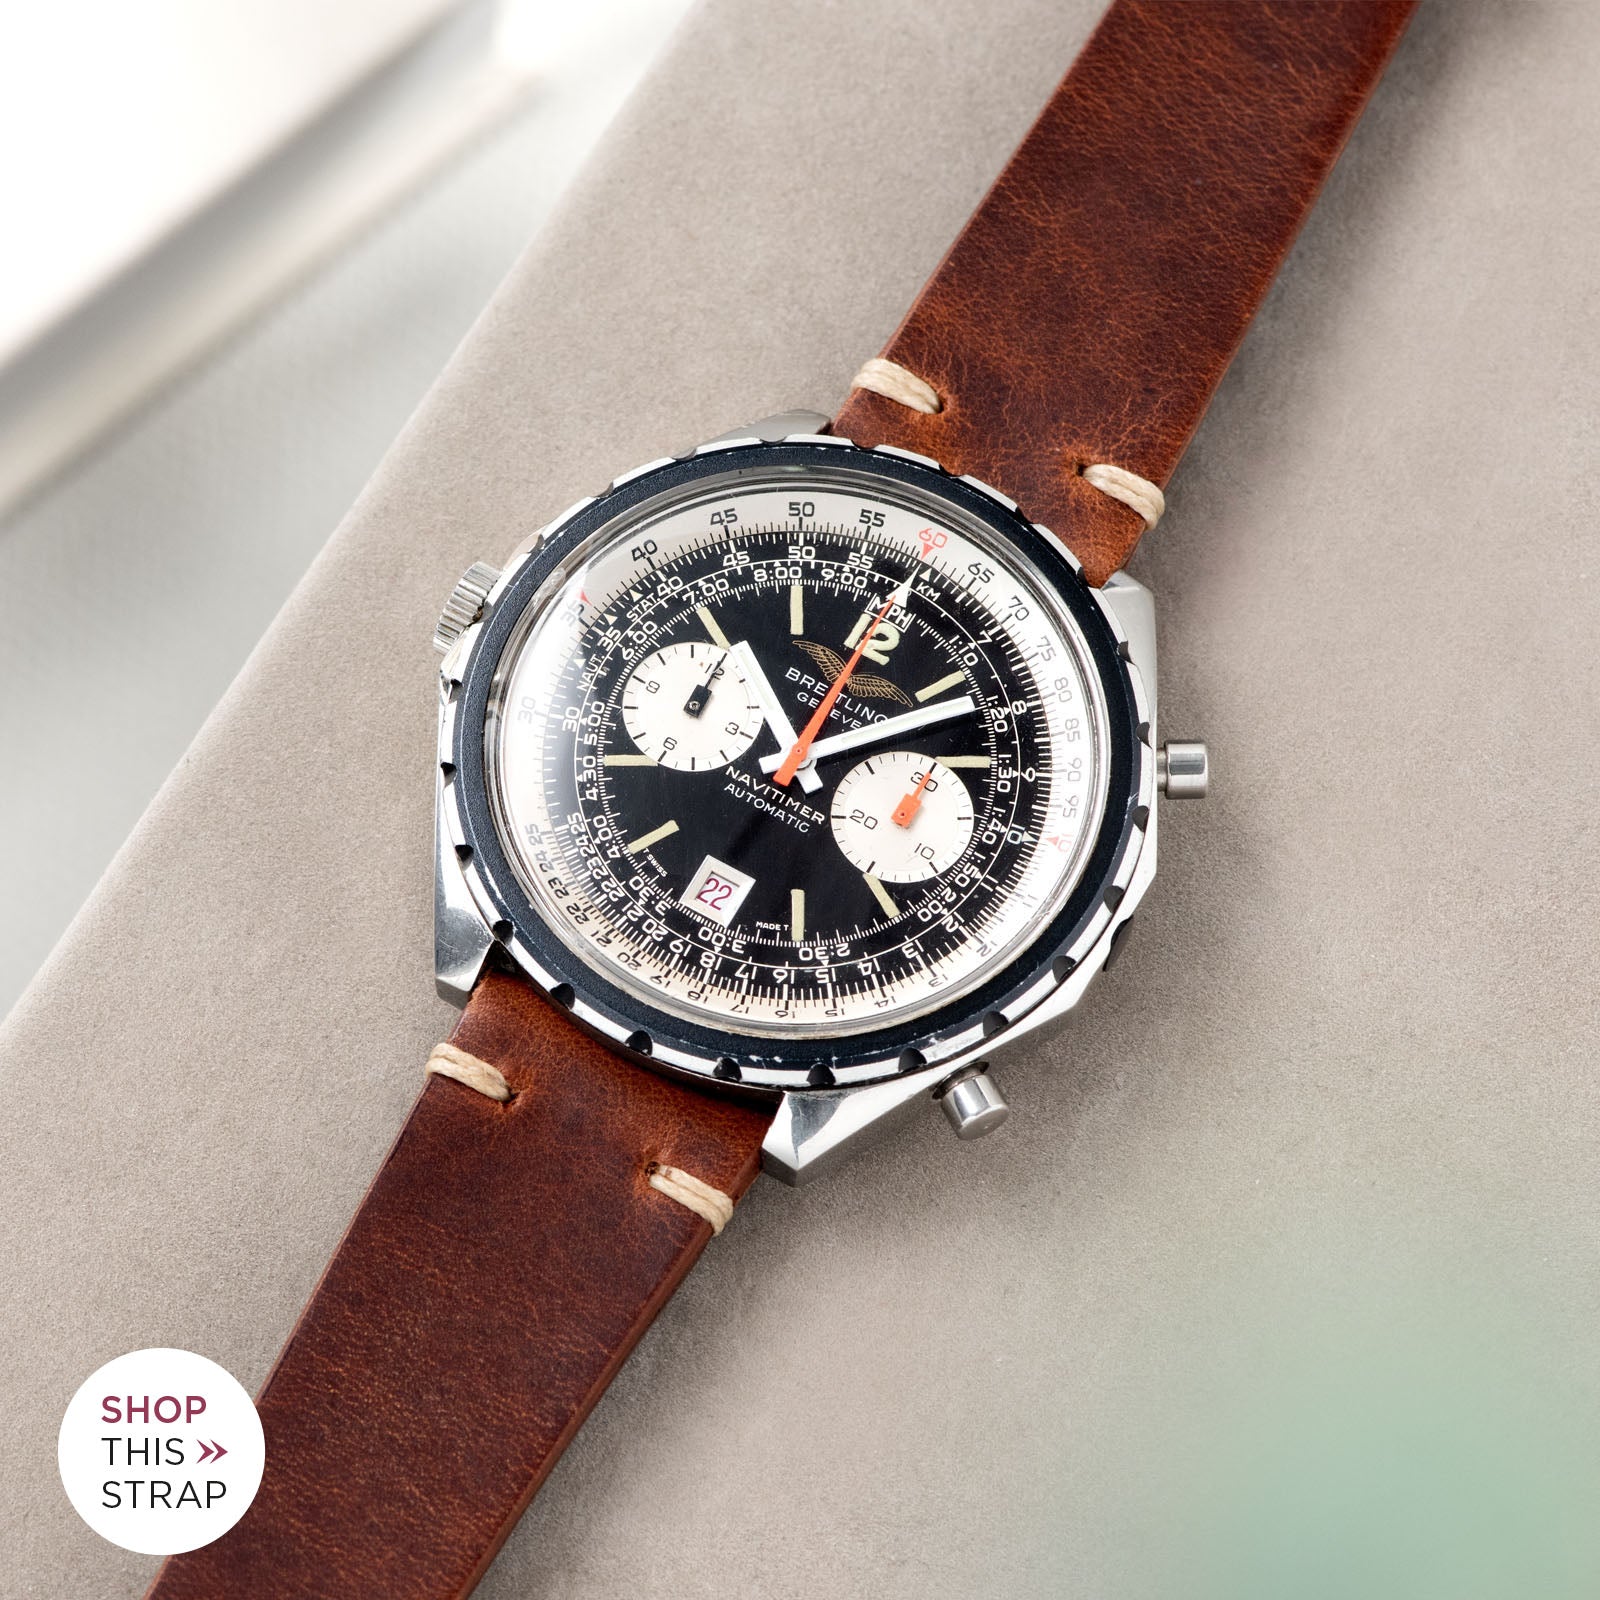 Bulang and Sons_Strap Guide_Breitling Navitimer ref issued to iraqi air force ref 1806_Siena Brown Leather Watch Strap